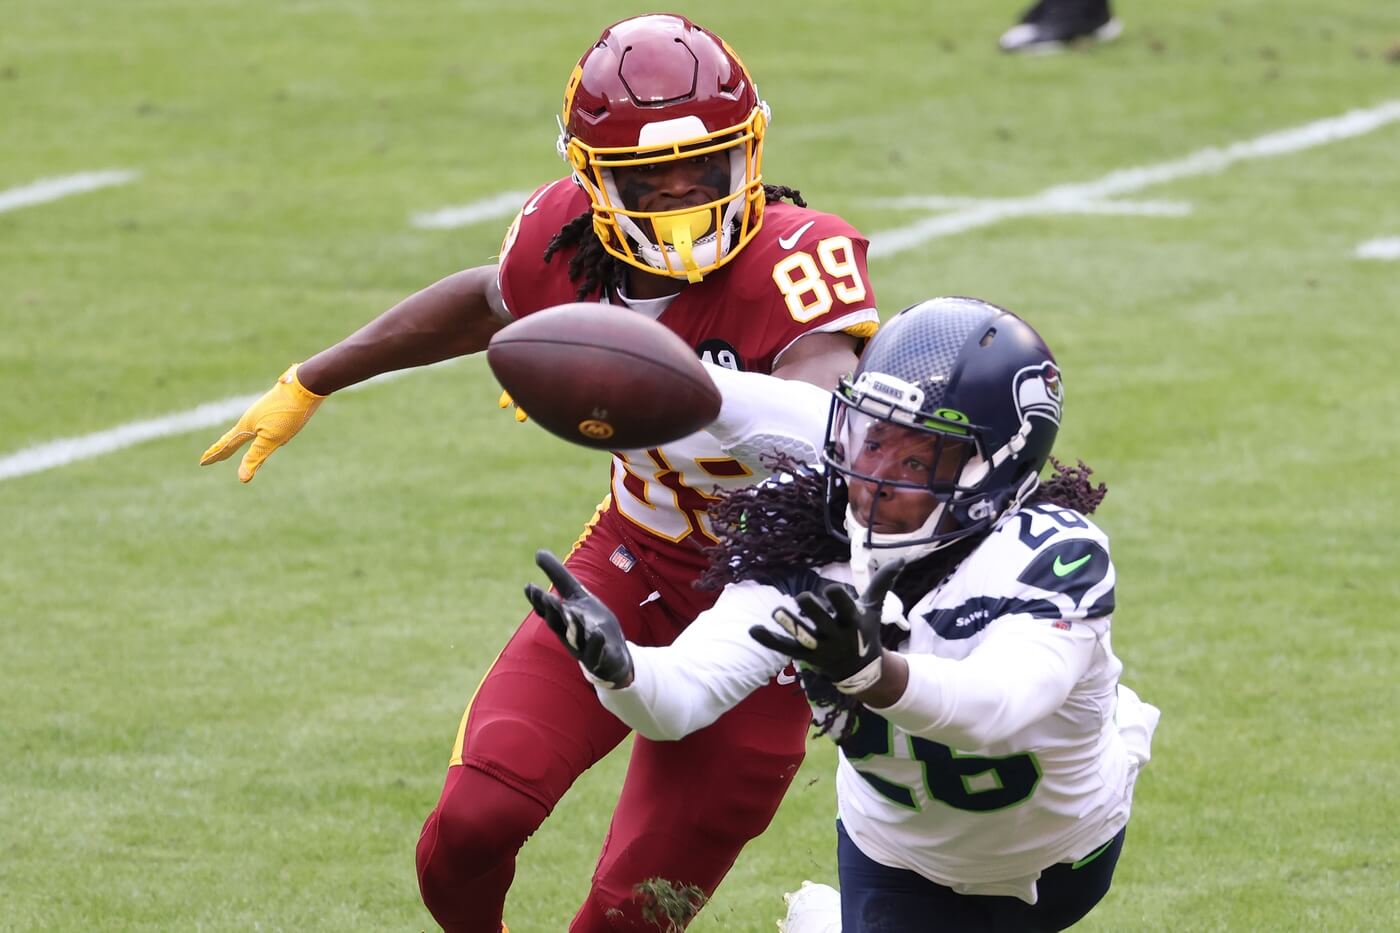 Dec 20, 2020; Landover, Maryland, USA; Seattle Seahawks cornerback Shaquill Griffin (26) intercepts a pass in front of Washington Football Team wide receiver Cam Sims (89) in the second quarter at FedExField. Mandatory Credit: Geoff Burke-USA TODAY Sports